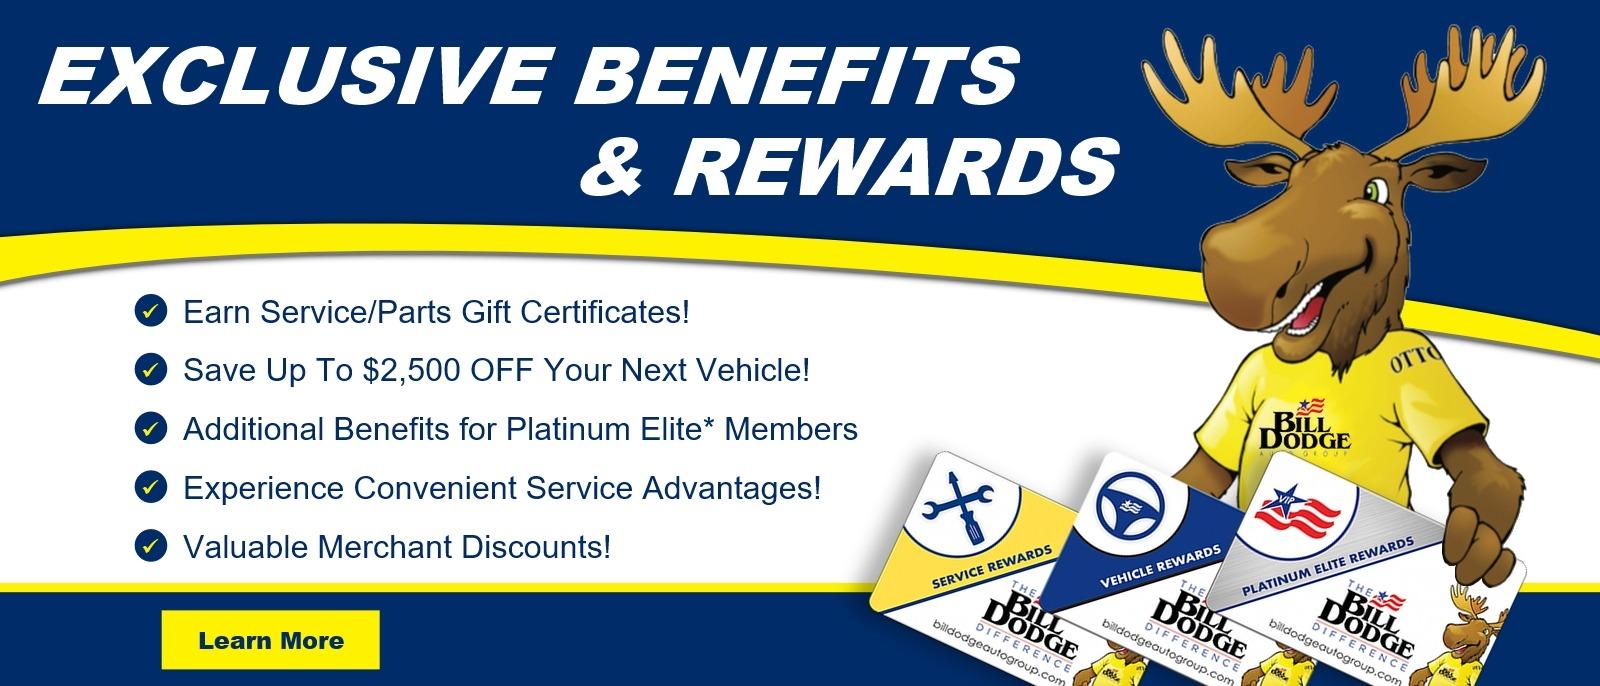 Join the exclusive Bill Dodge Rewards Program!  Save up to $2,500 off your next vehicle from any Bill Dodge Auto Group location.